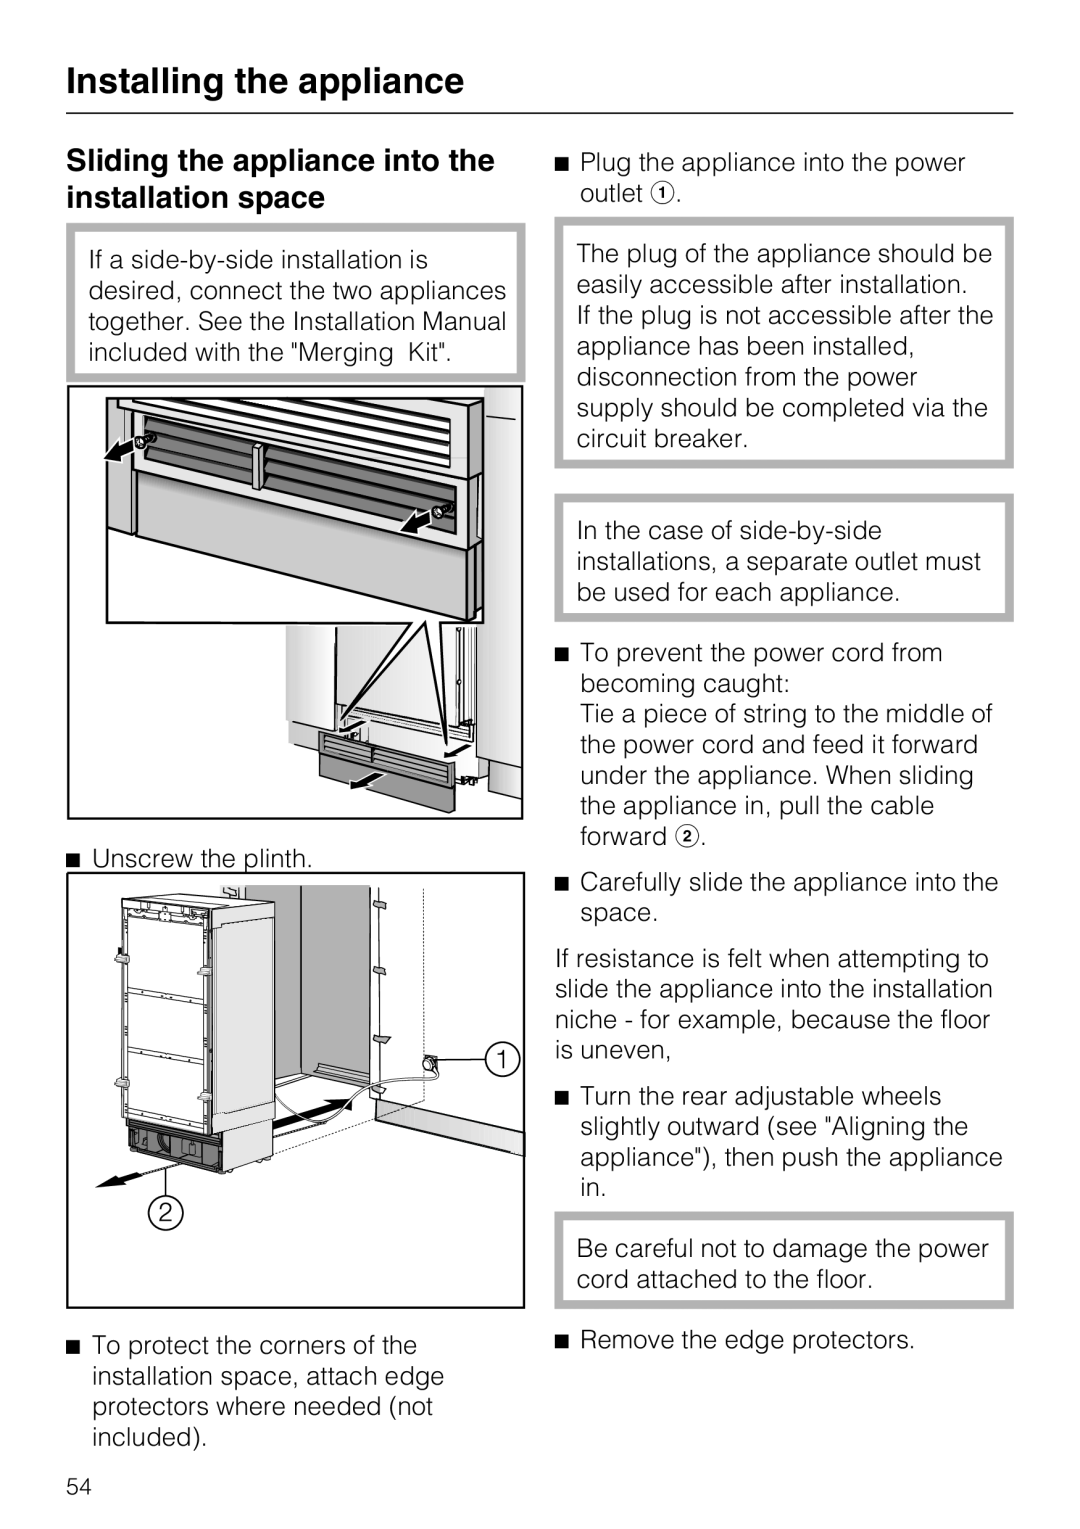 Miele 09 920 570 installation instructions Sliding the appliance into the installation space, Installing the appliance 